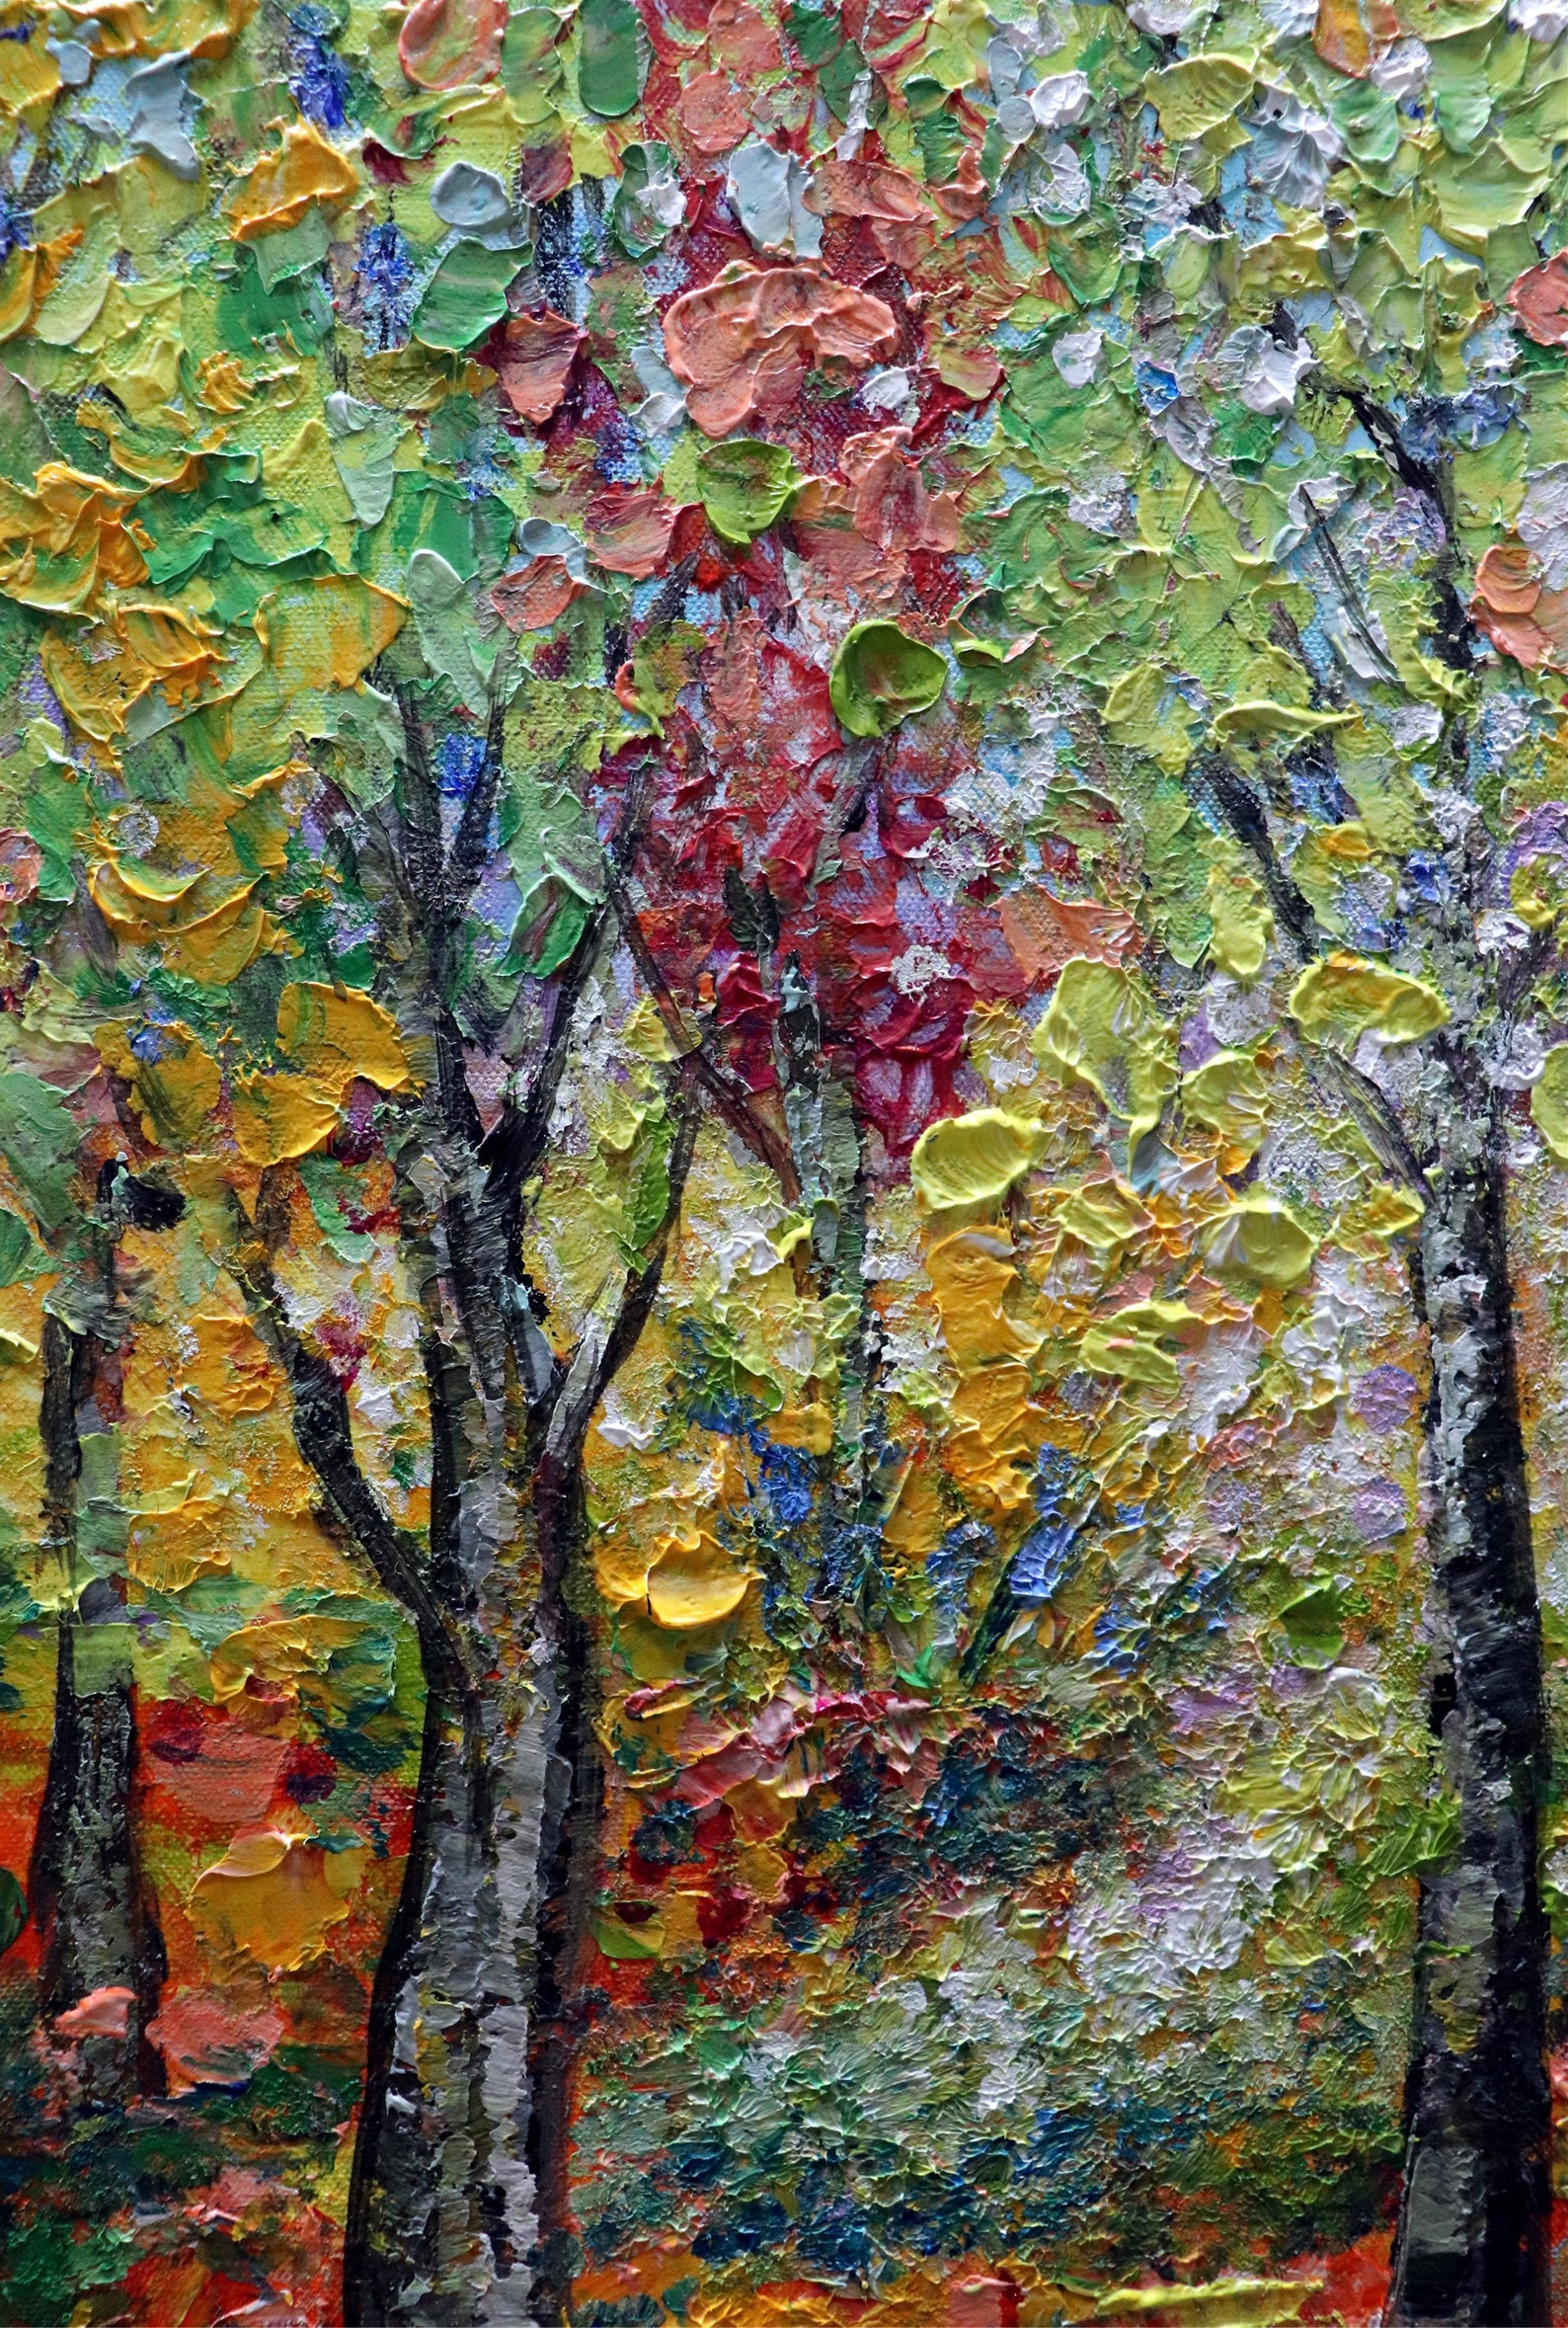 Colorful Blooming Flowers Summer Birch Trees Park Original Oil - Etsy